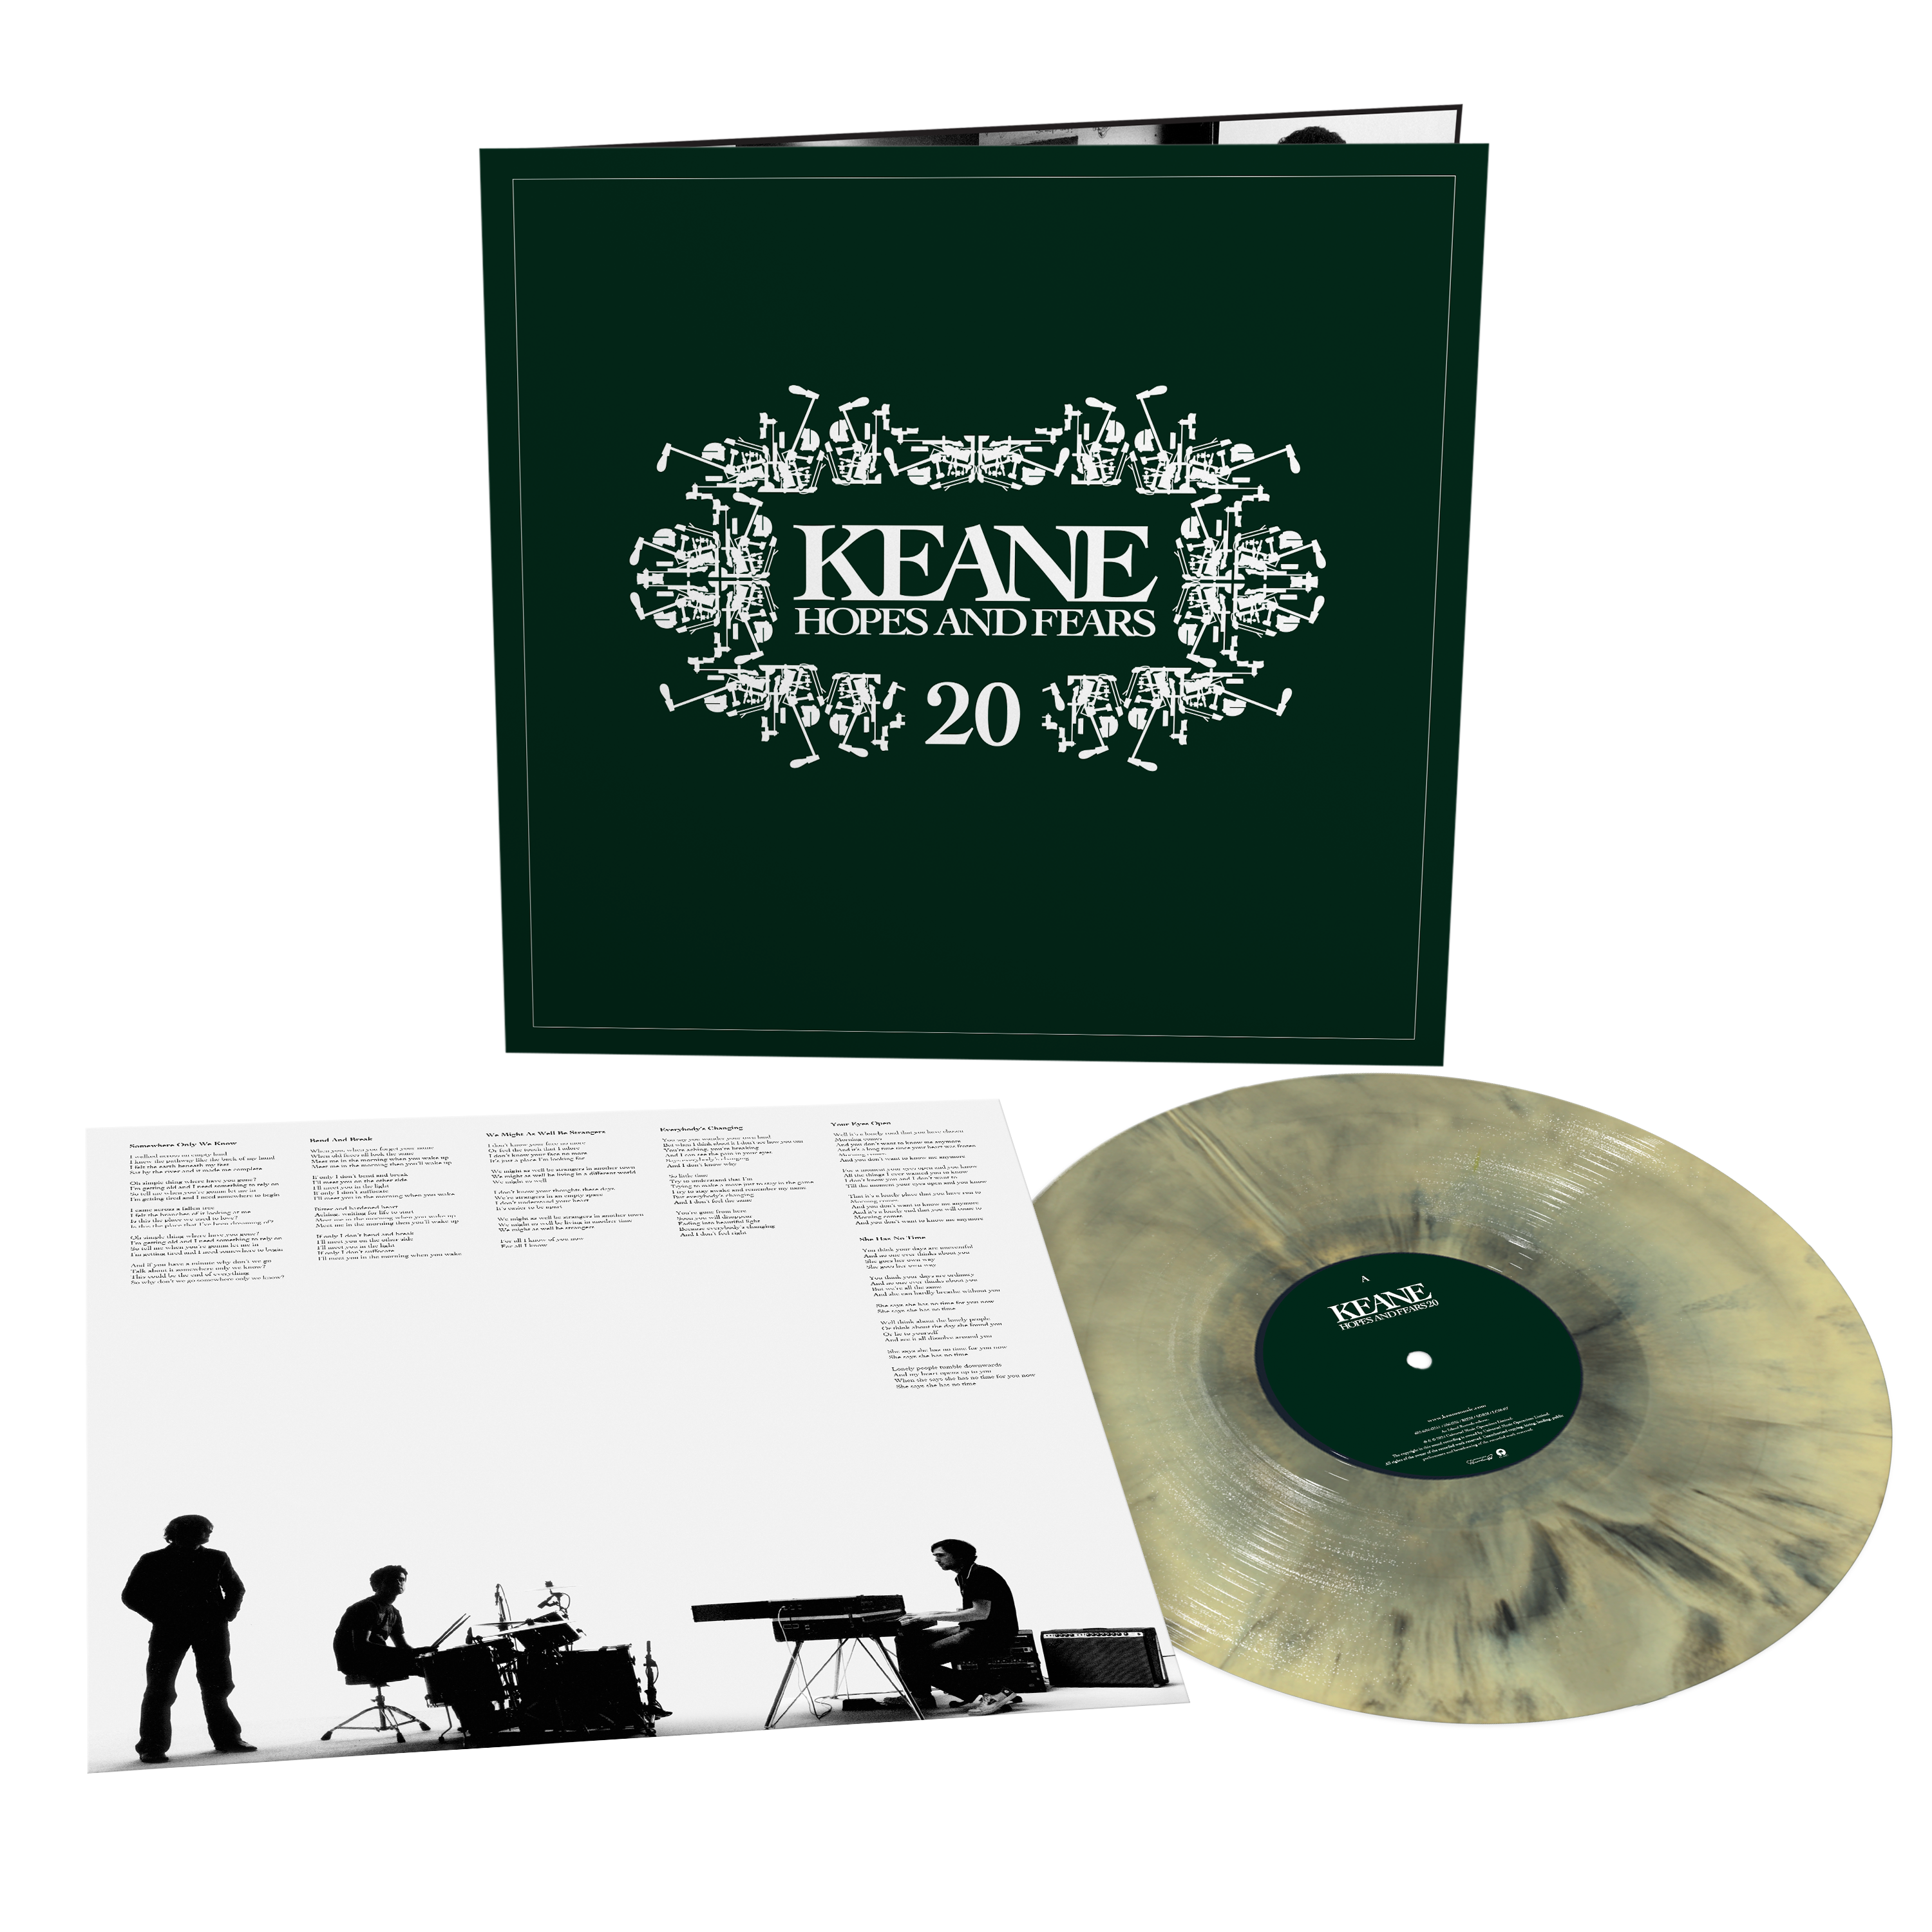 Keane - 20th Anniversary Hopes and Fears Limited Galaxy Vinyl LP